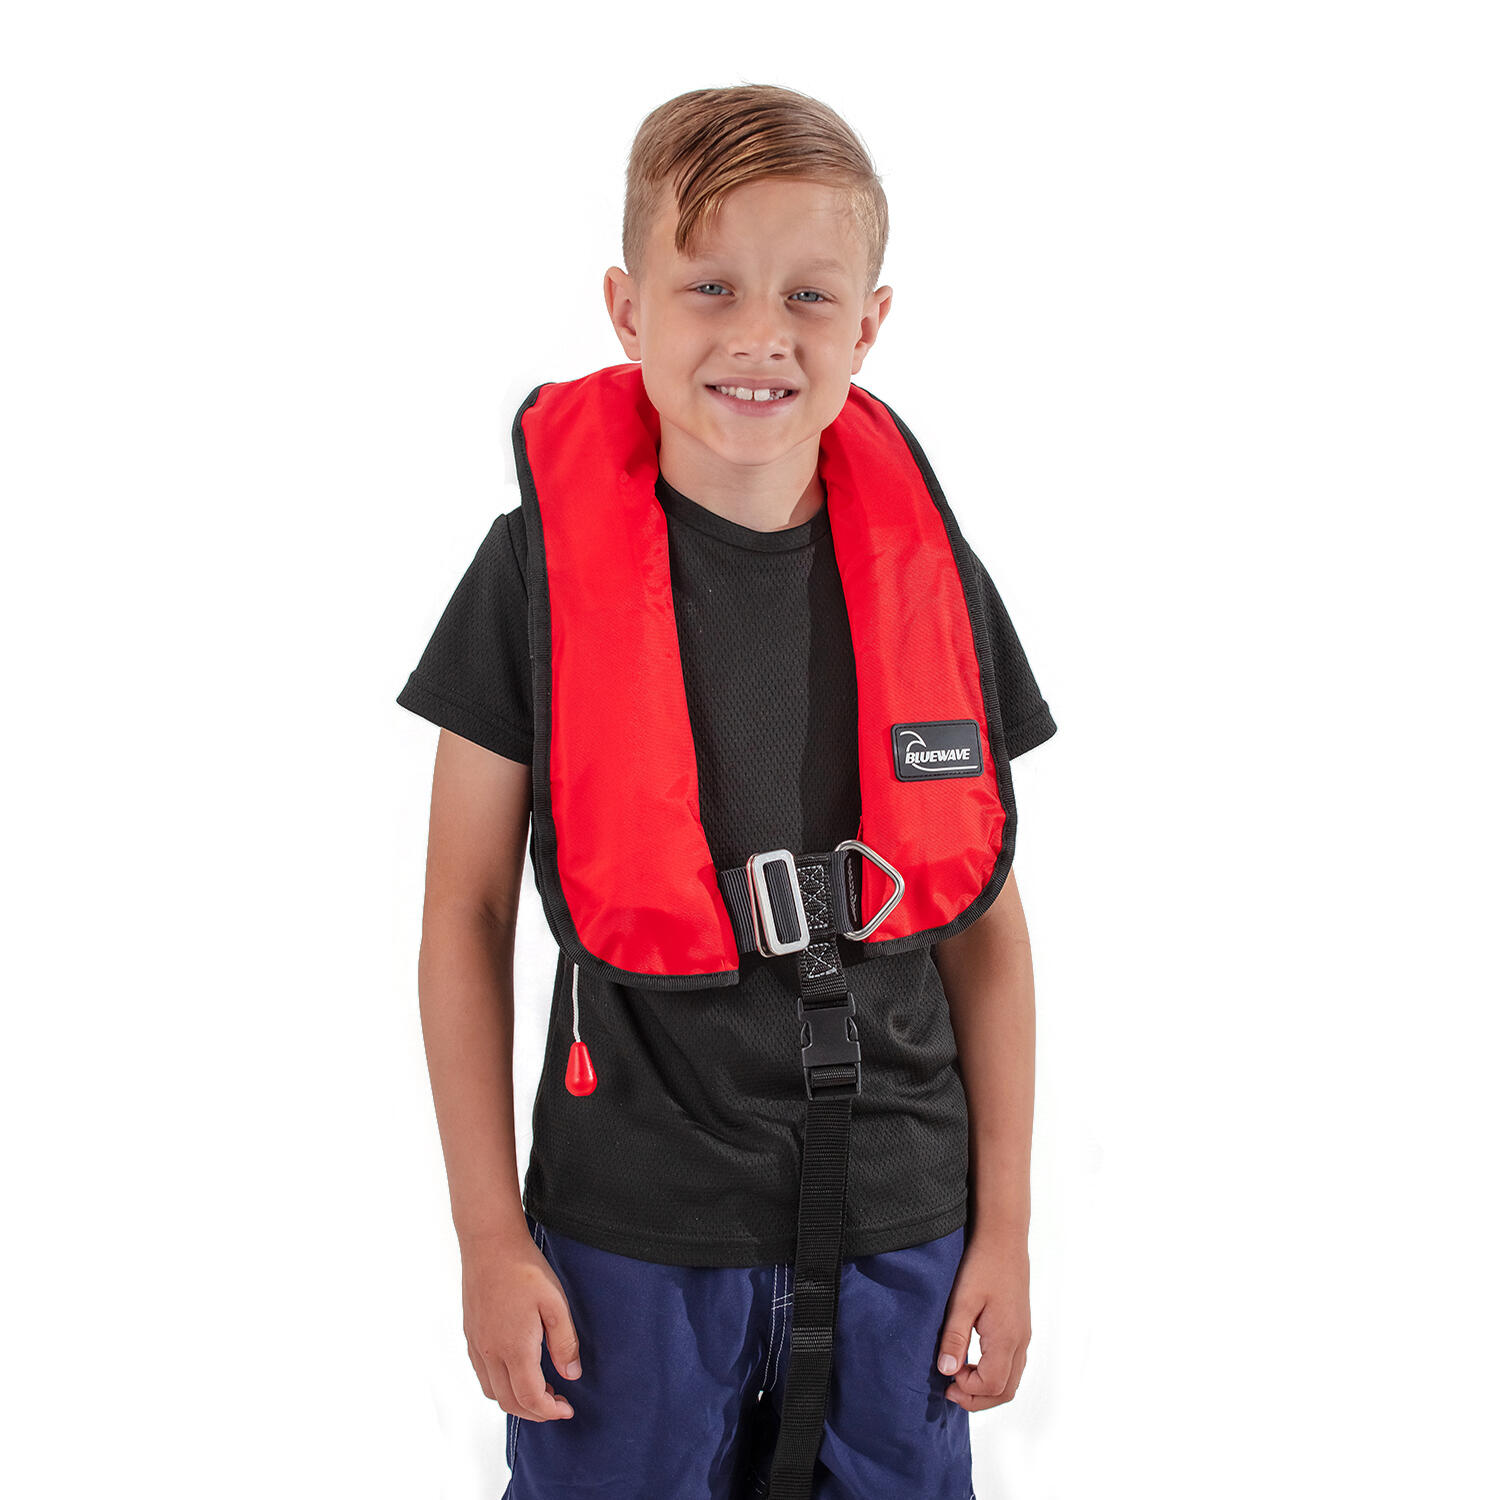 Bluewave Child Automatic 150N Gas Lifejacket with harness 2/2